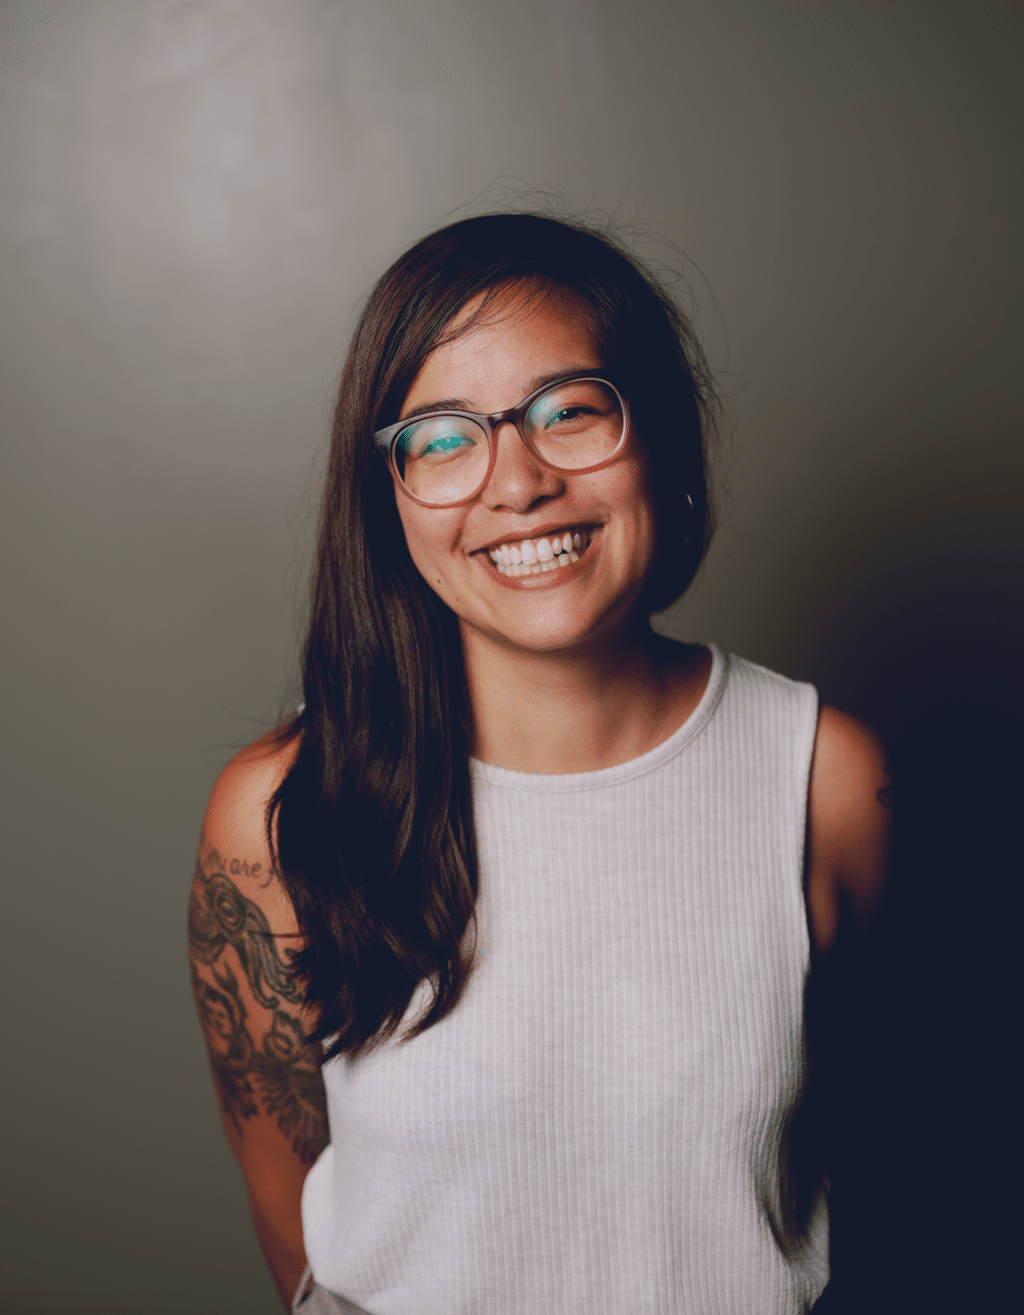 Photo of Danni Quintos, an Asian American woman with long brown hair. She wears glasses and is smiling. A large tattoo covers her right arm.